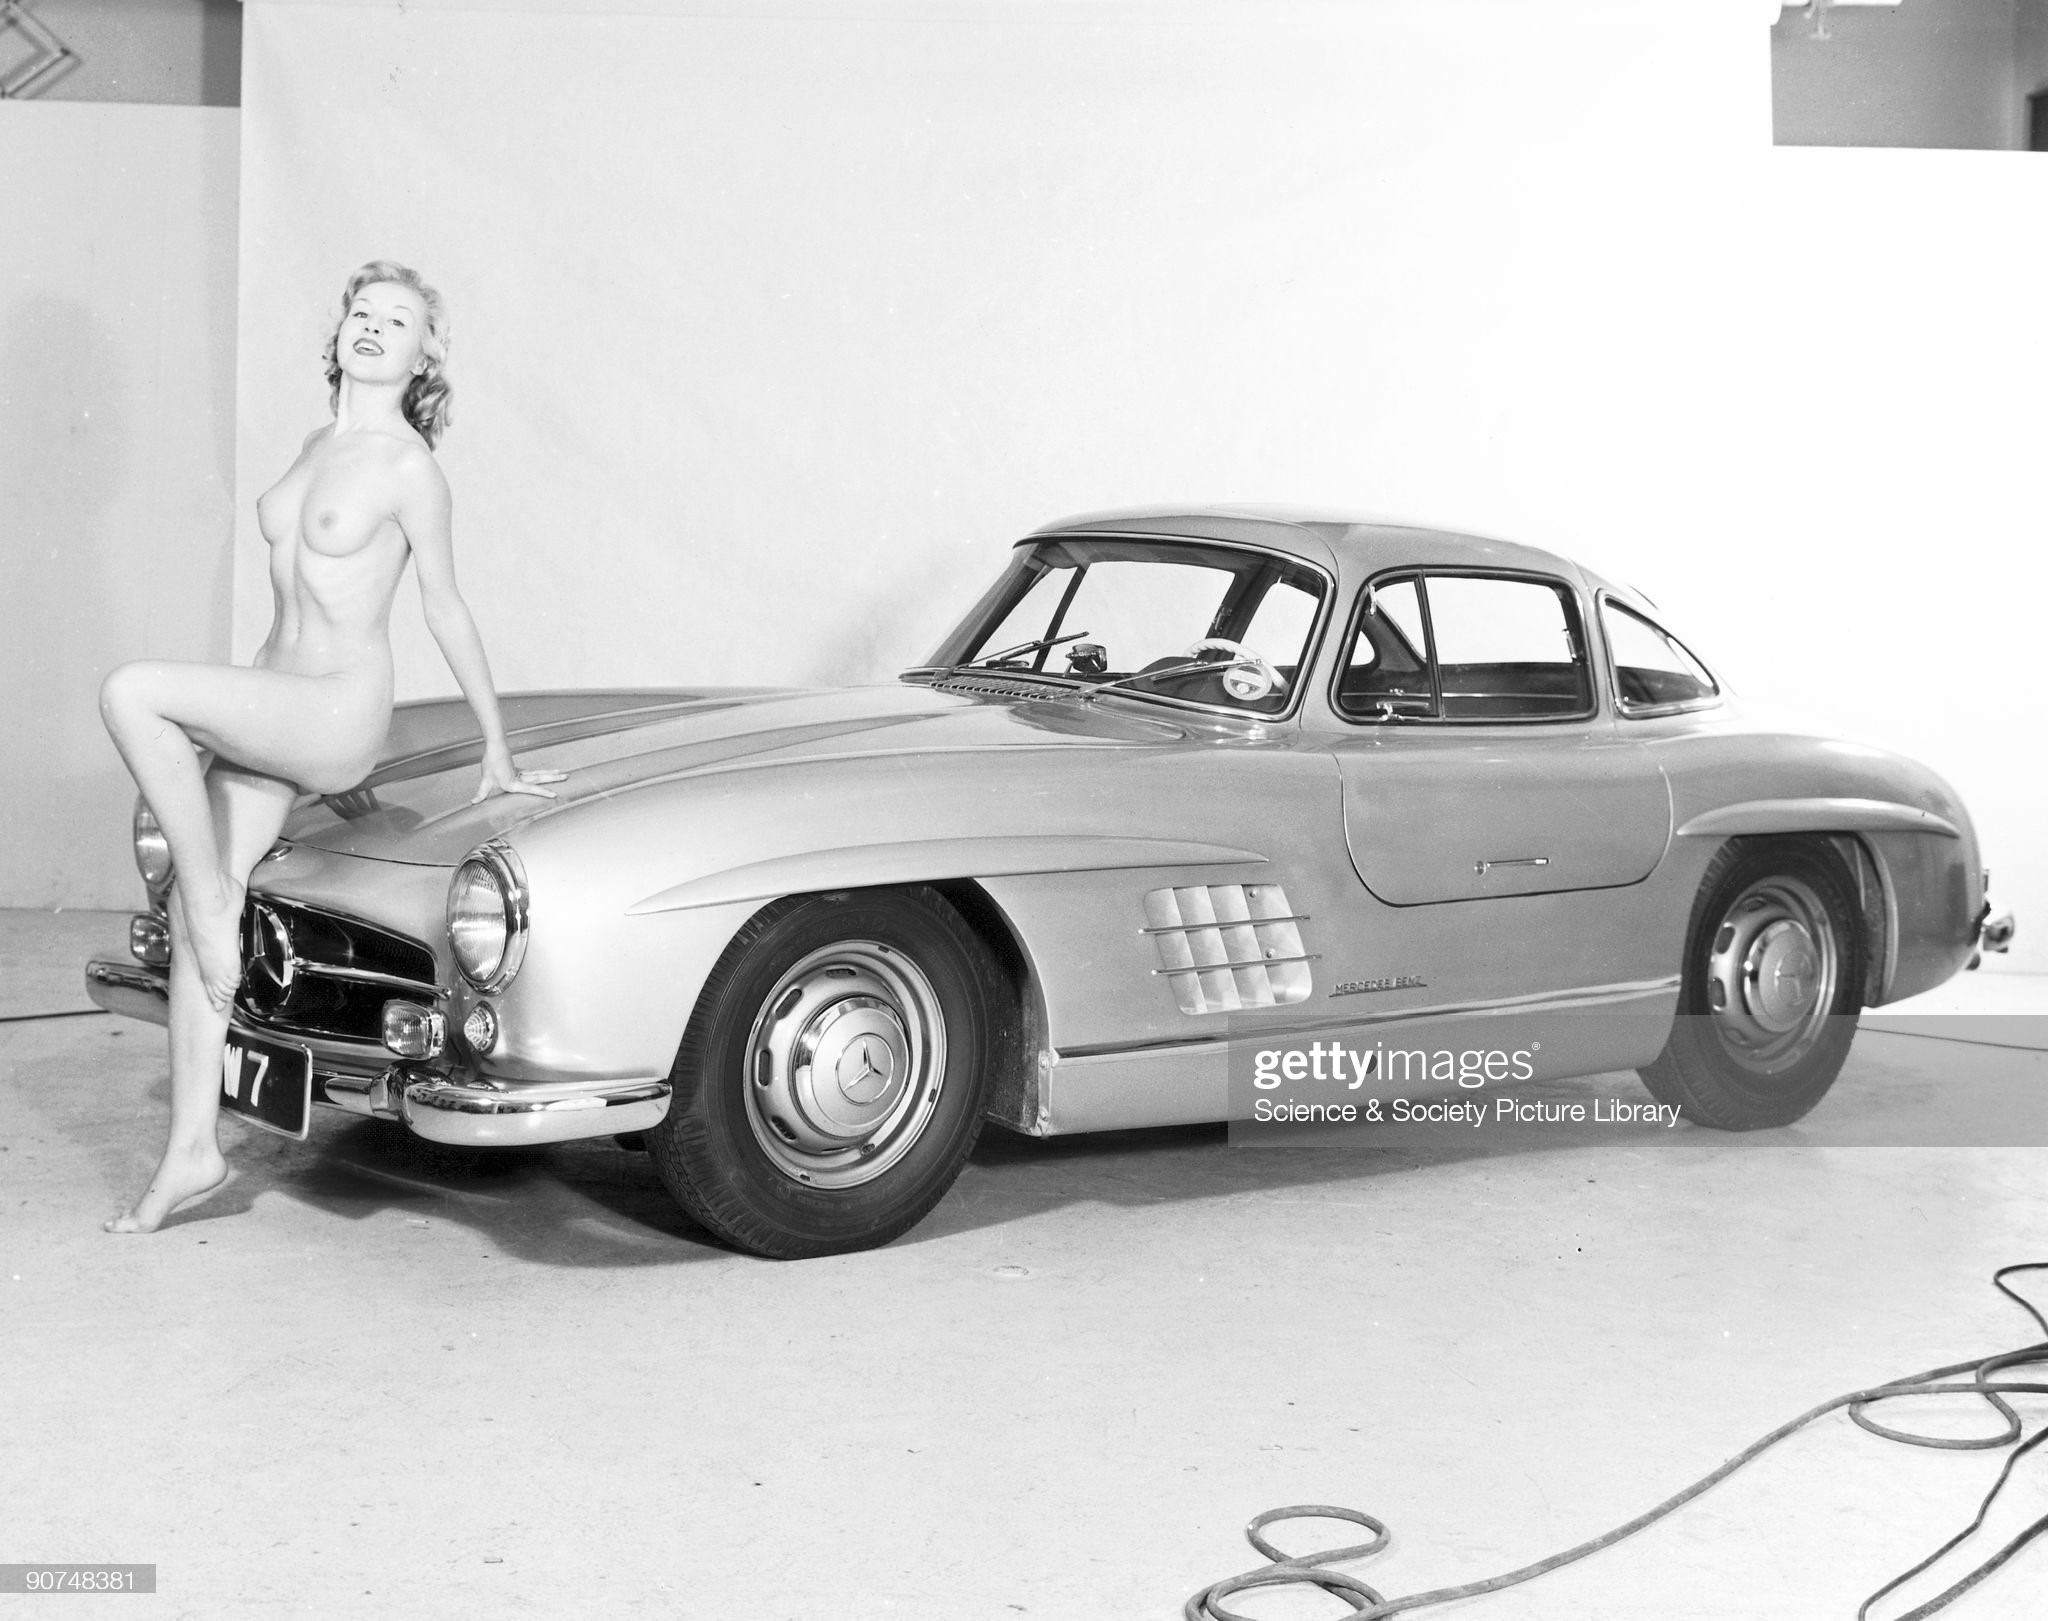 Nude model and Mercedes wing-door car, c 1961. Germany, July 13: model reclining on a Mercedes. 